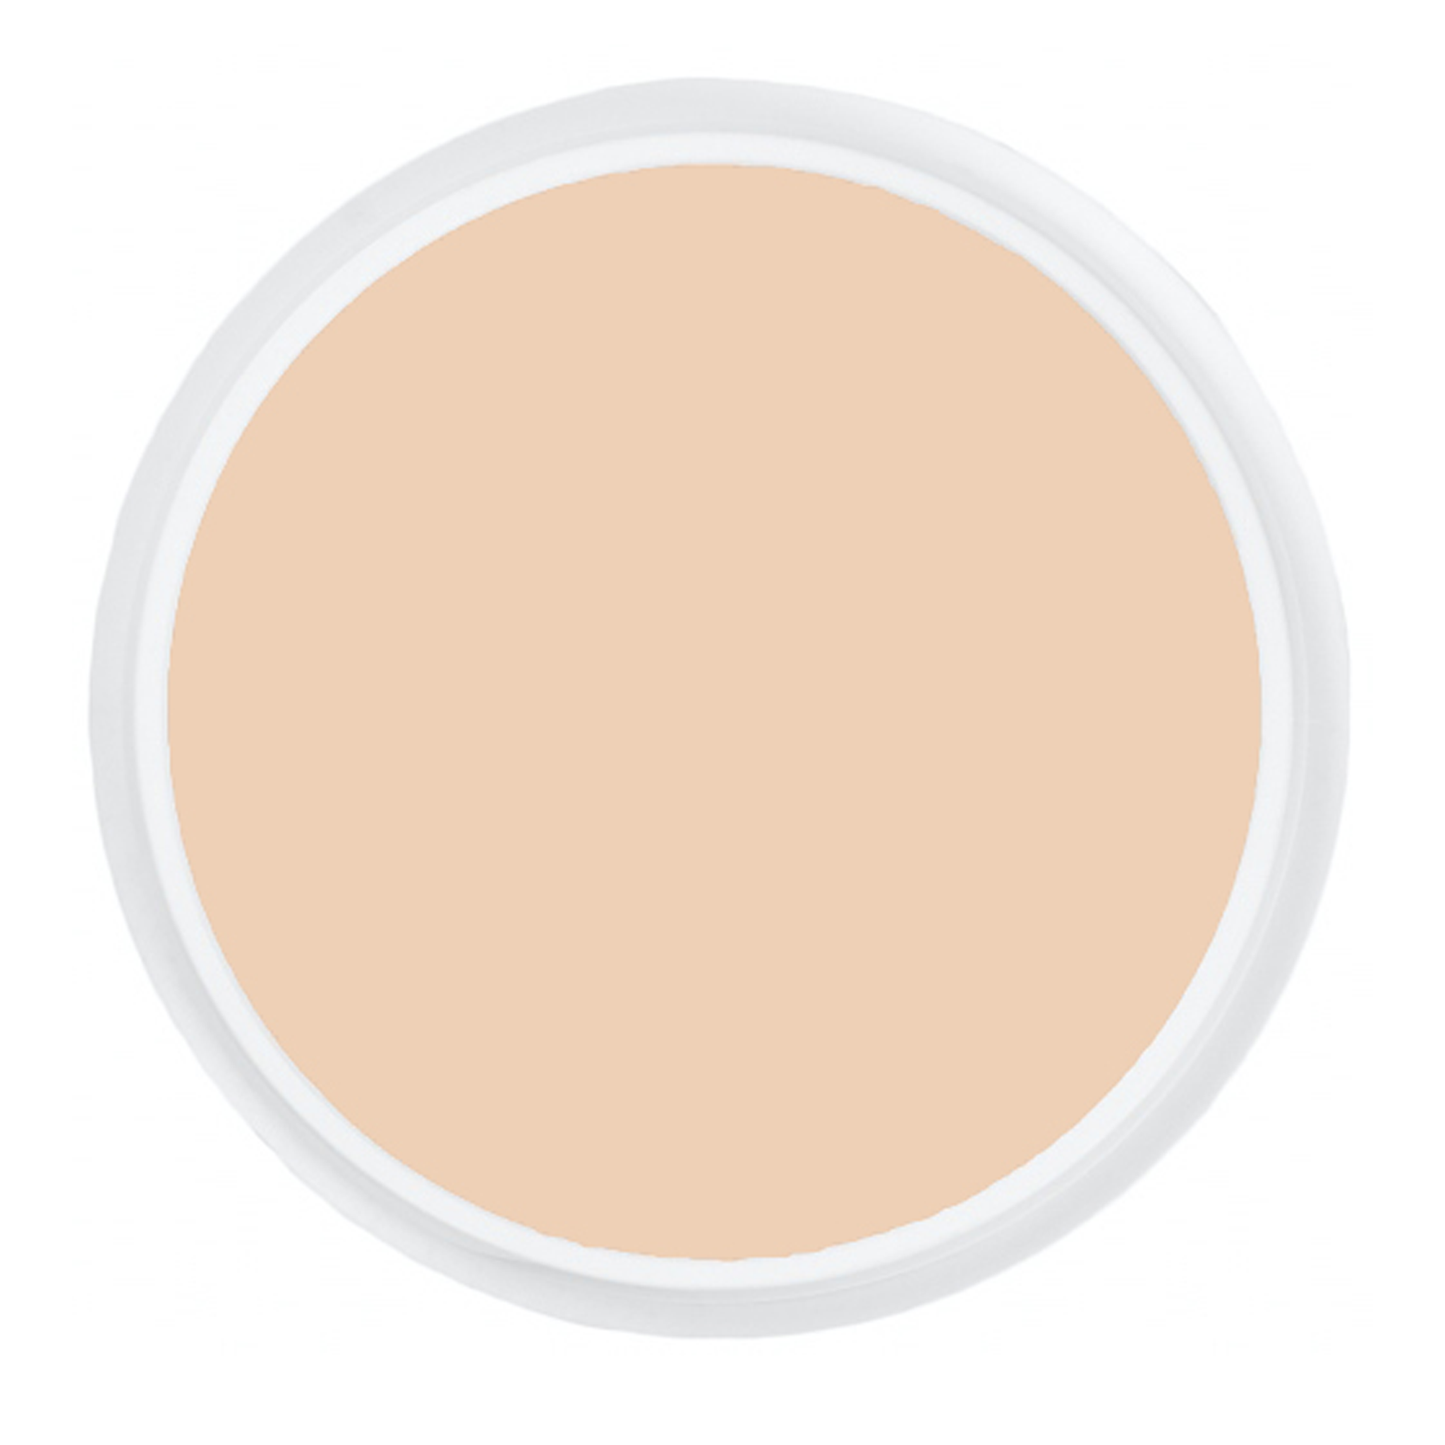 Creme Character Foundations